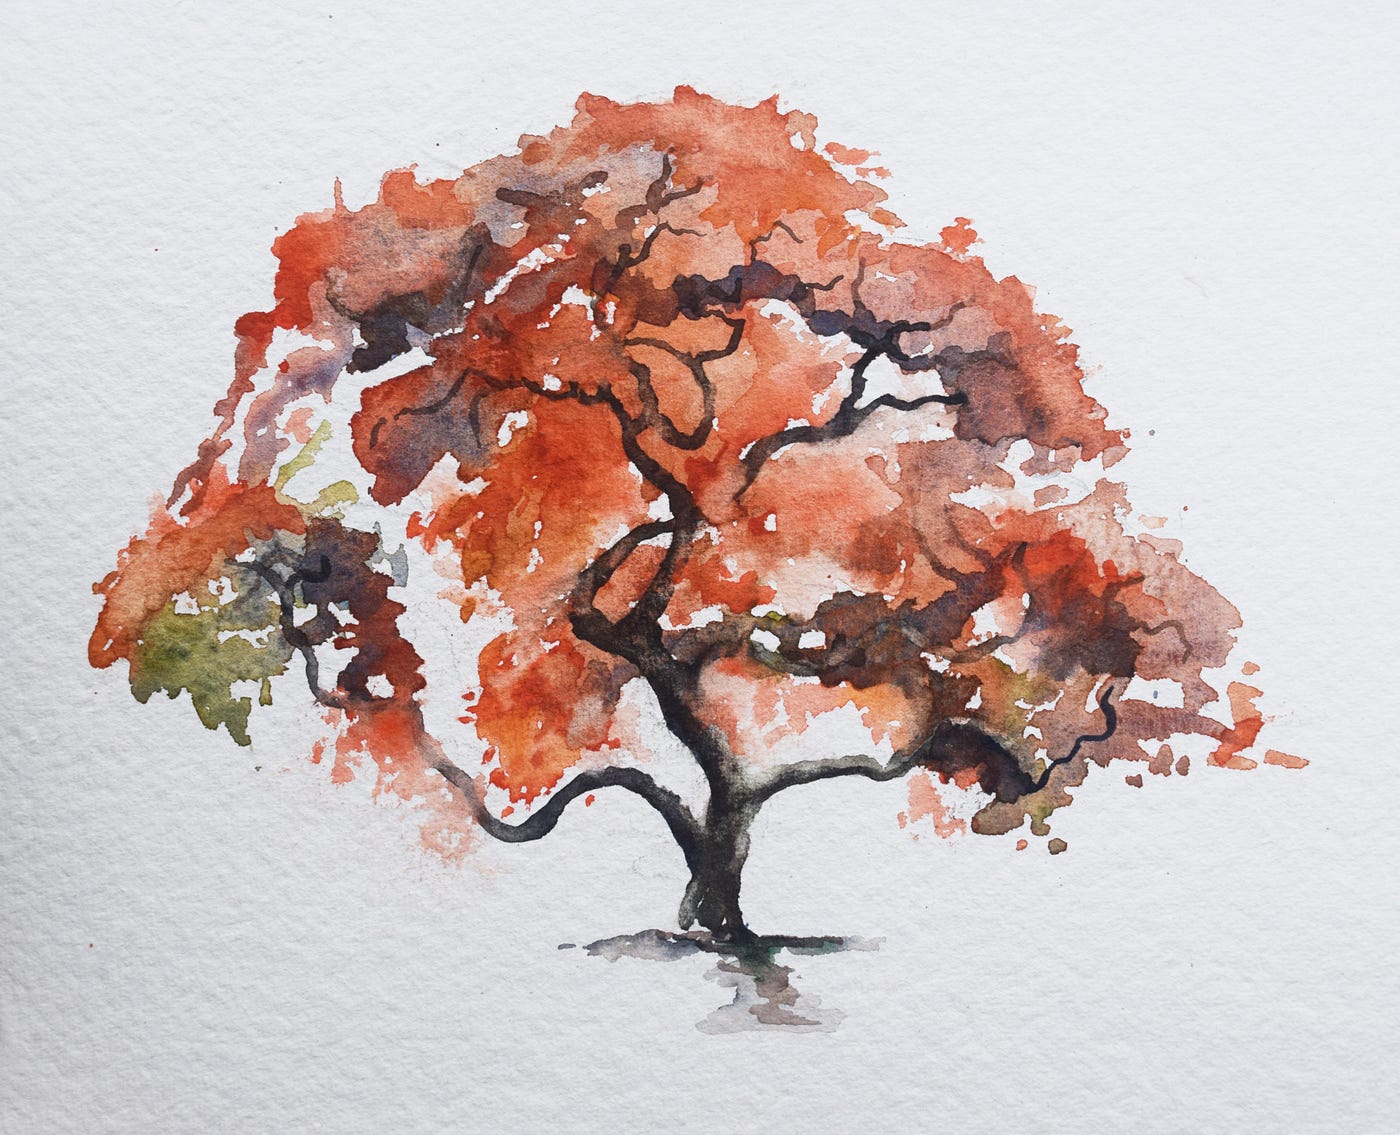 Painting A Japanese Maple In Watercolor, by Christopher P Jones